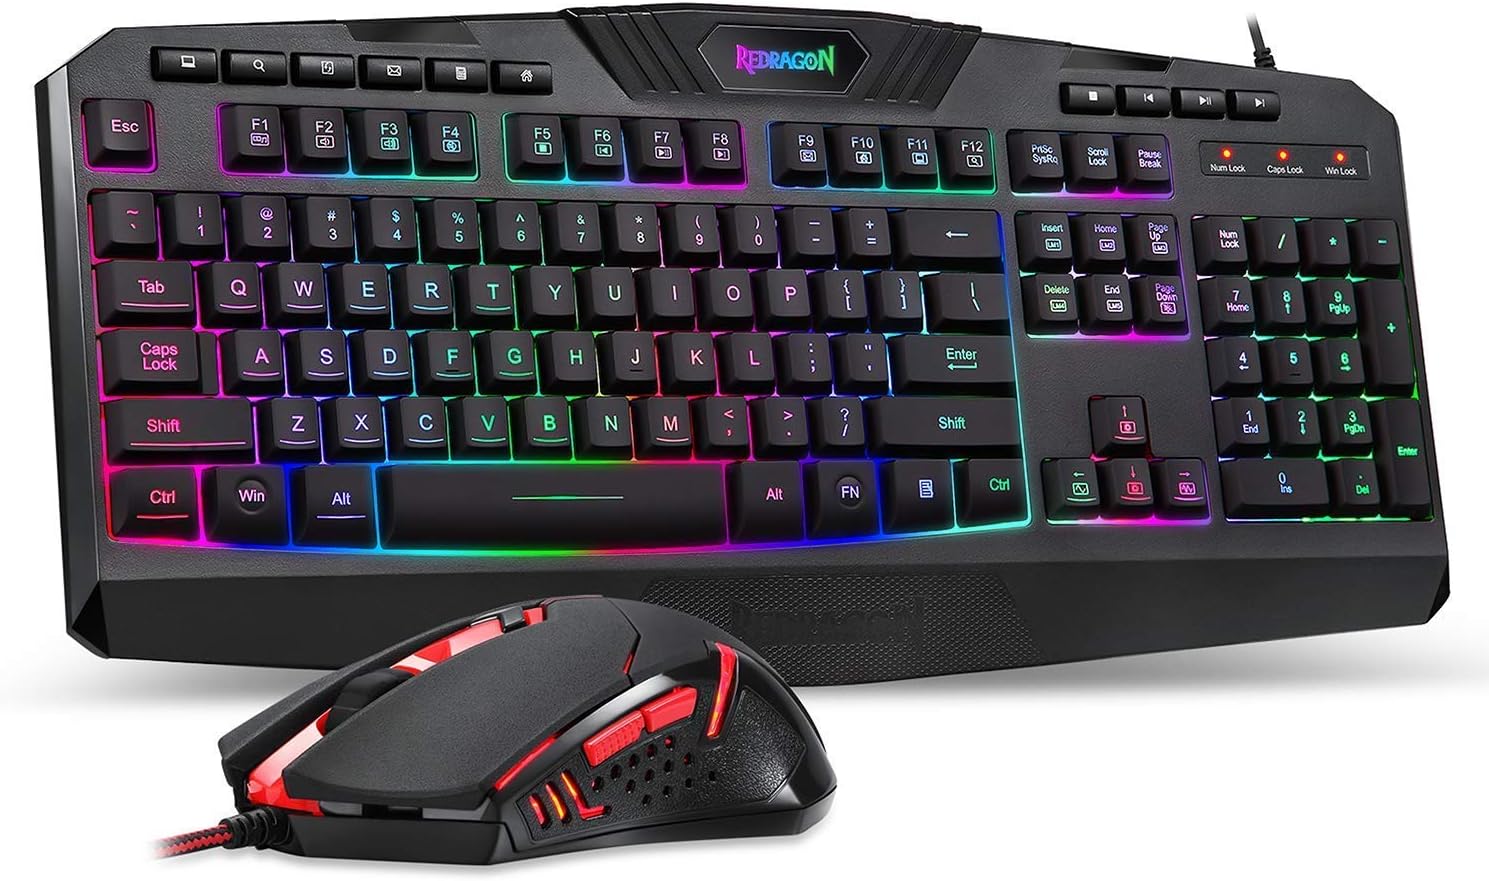 Unlock Your Savings Now with the Redragon S101 Gaming Keyboard and M601 Mouse Combo!